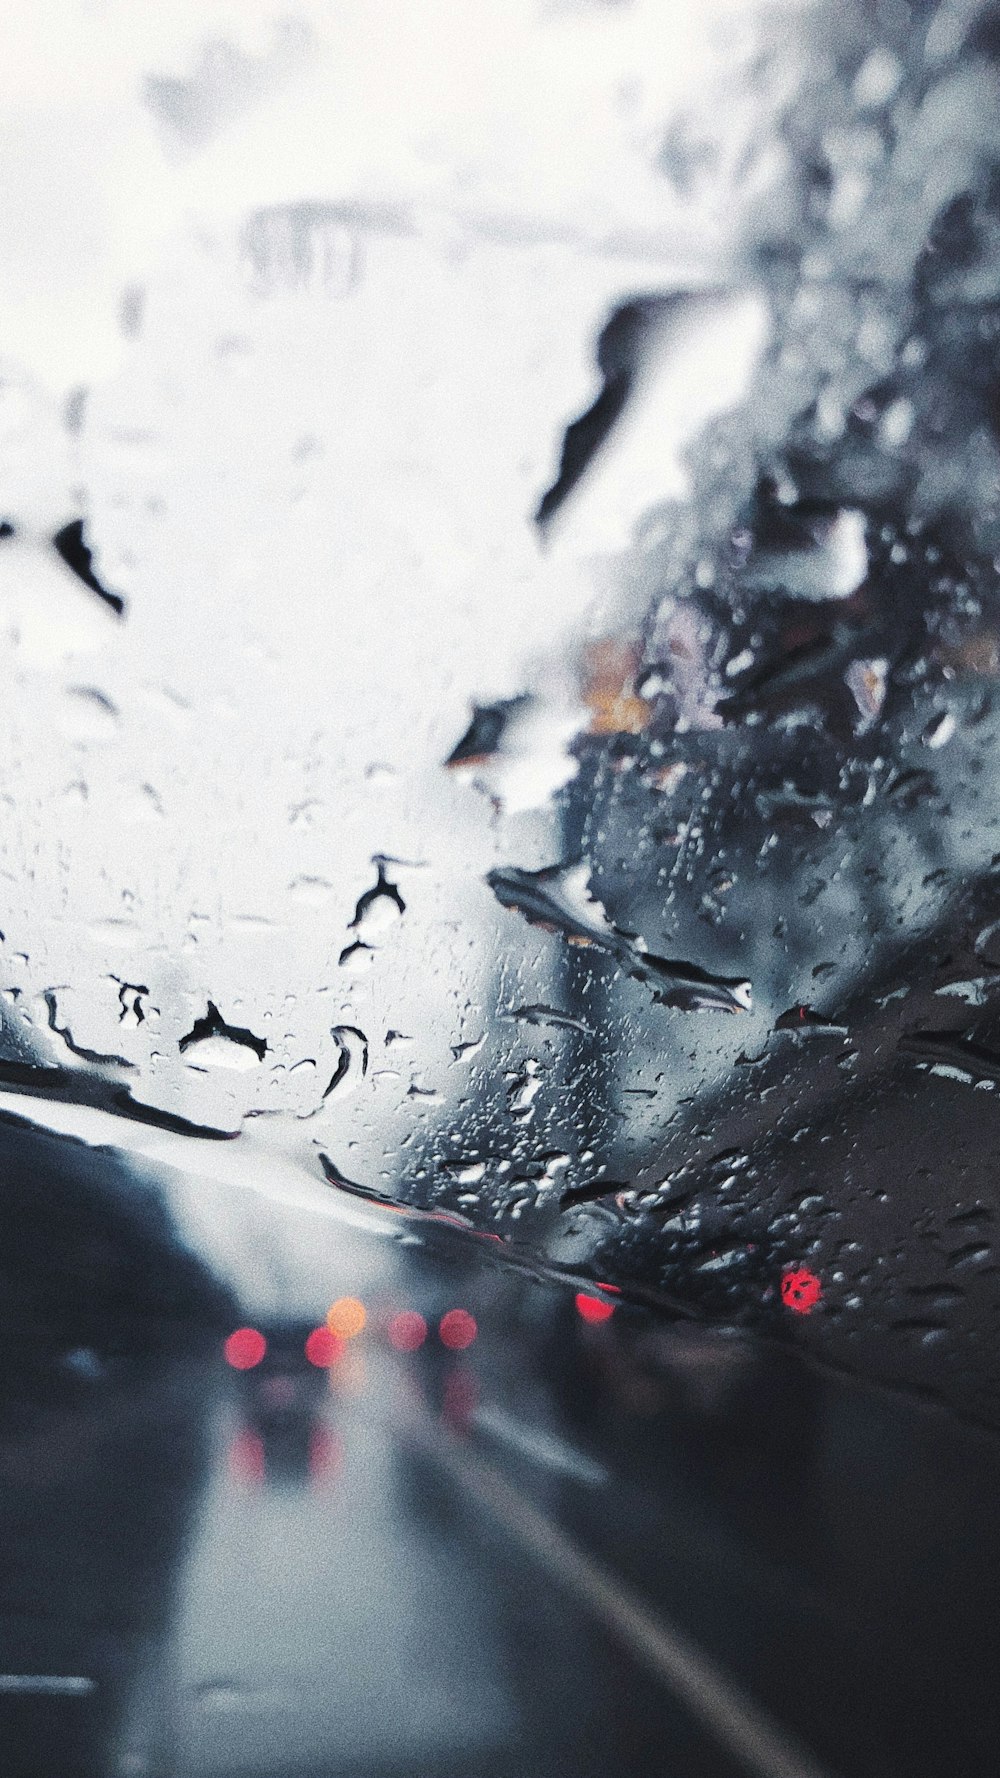 a view of a rain covered windshield from inside a car